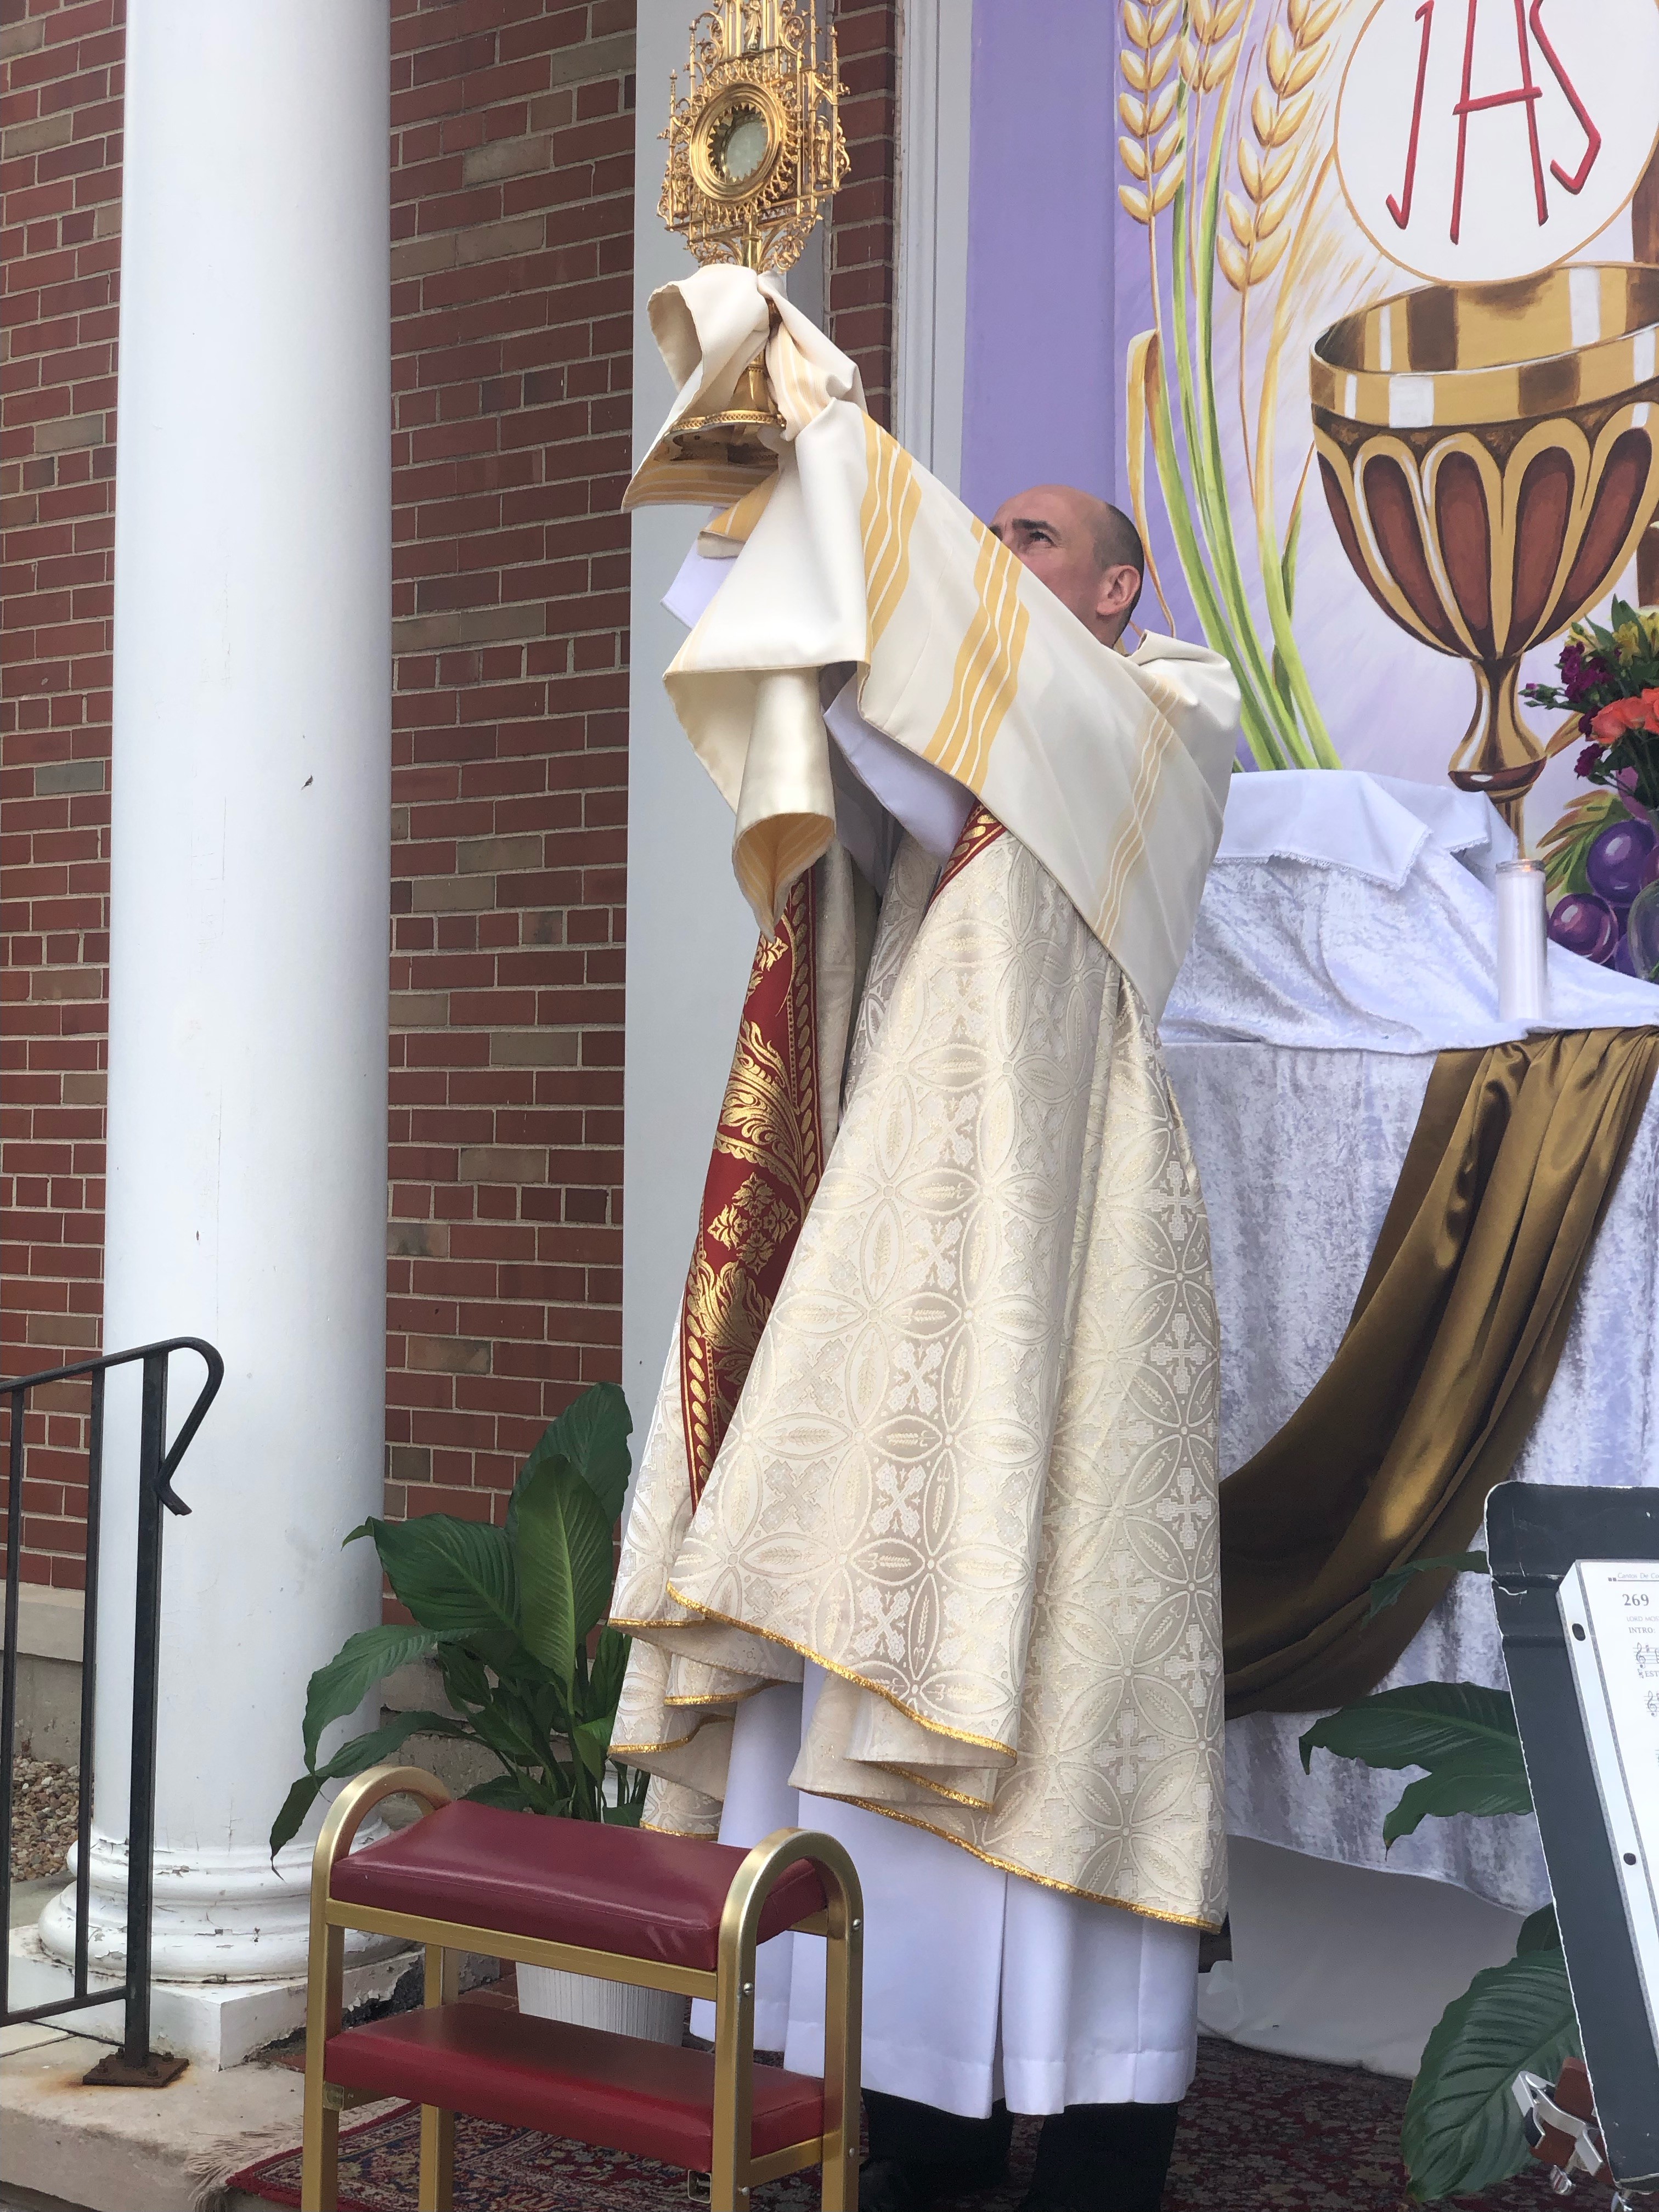 Fr. Kris Cepil, SDB, holds the monstrance during the celebration in Chicago.